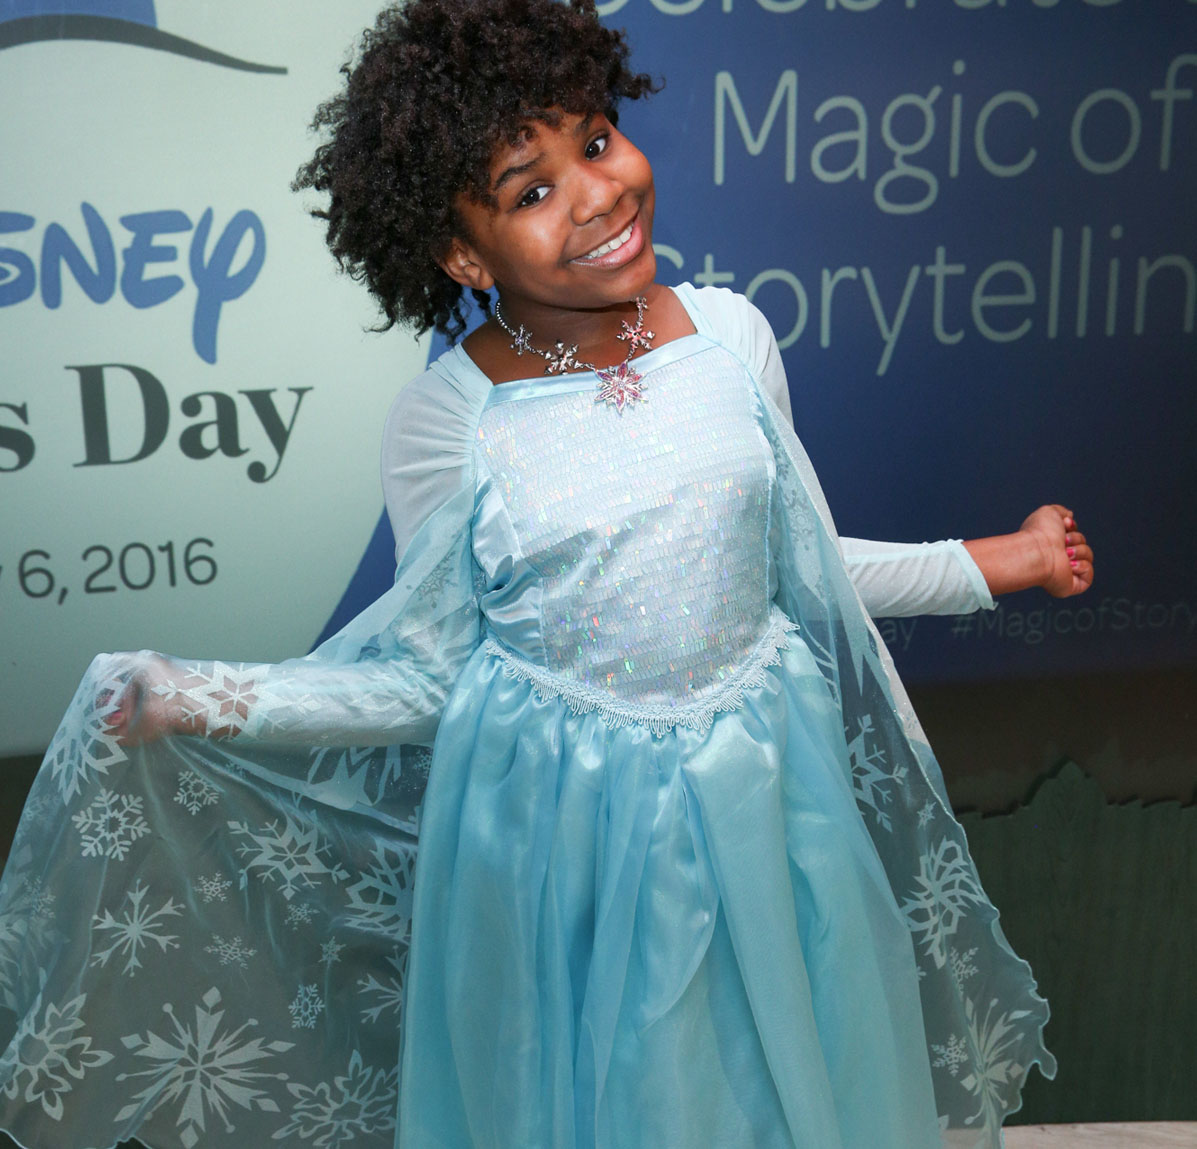 7. Frozen costumes. Trinitee Stokes celebrates Disney's 50 millionth book donation through First Book and the first annual Disney Reads Day with a special story time at the Disney Store on Saturday, Feb. 6, 2016, in Glendale, Calif. (Photo by Rich Fury/Invision for Disney/AP Images)